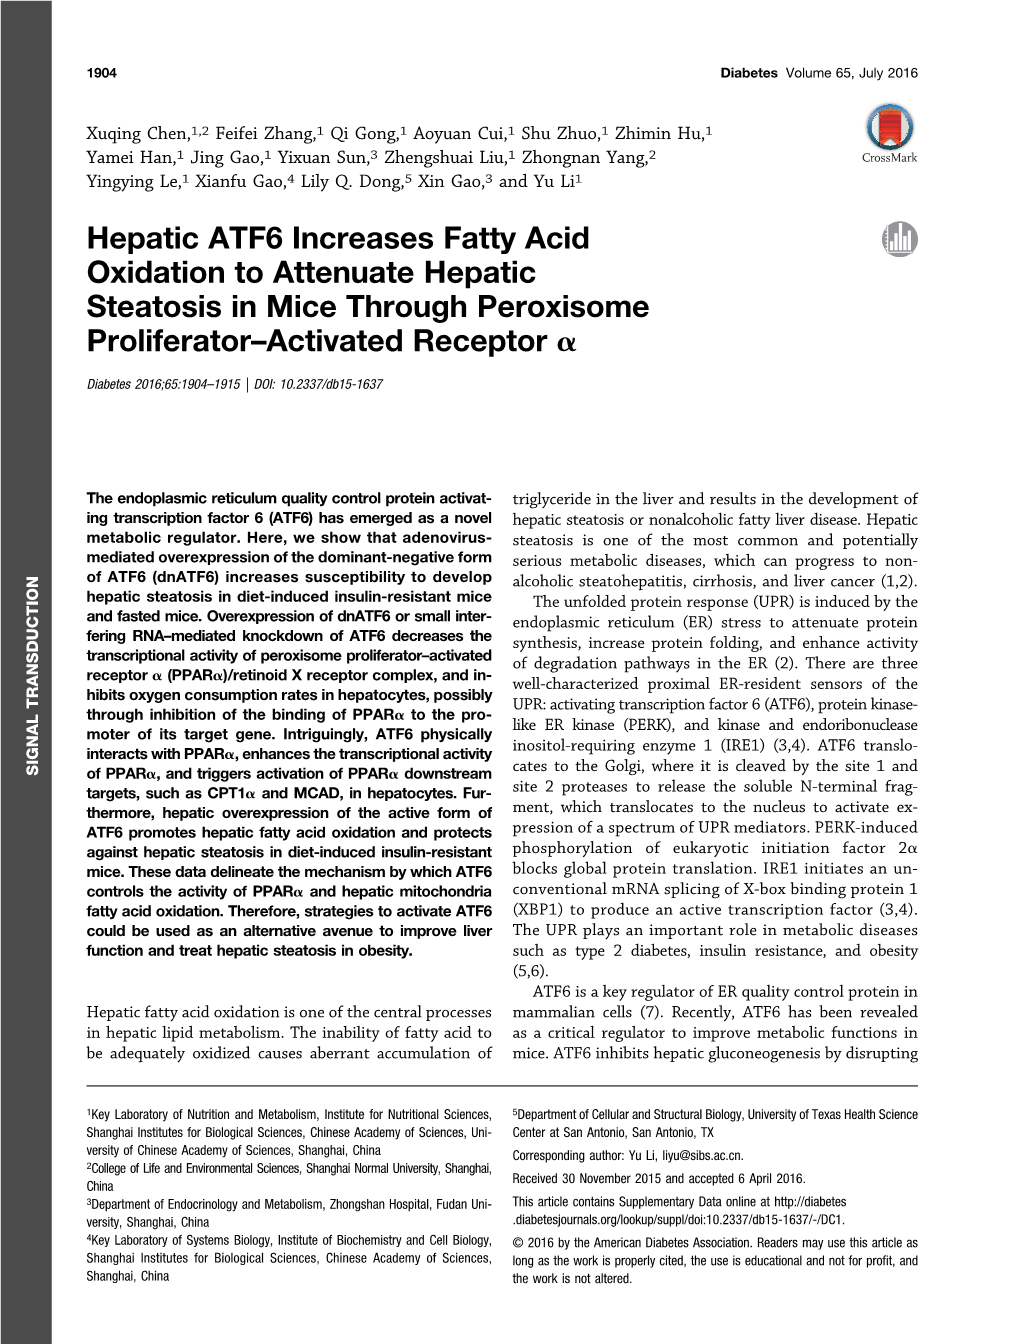 Hepatic ATF6 Increases Fatty Acid Oxidation to Attenuate Hepatic Steatosis in Mice Through Peroxisome Proliferator–Activated Receptor A